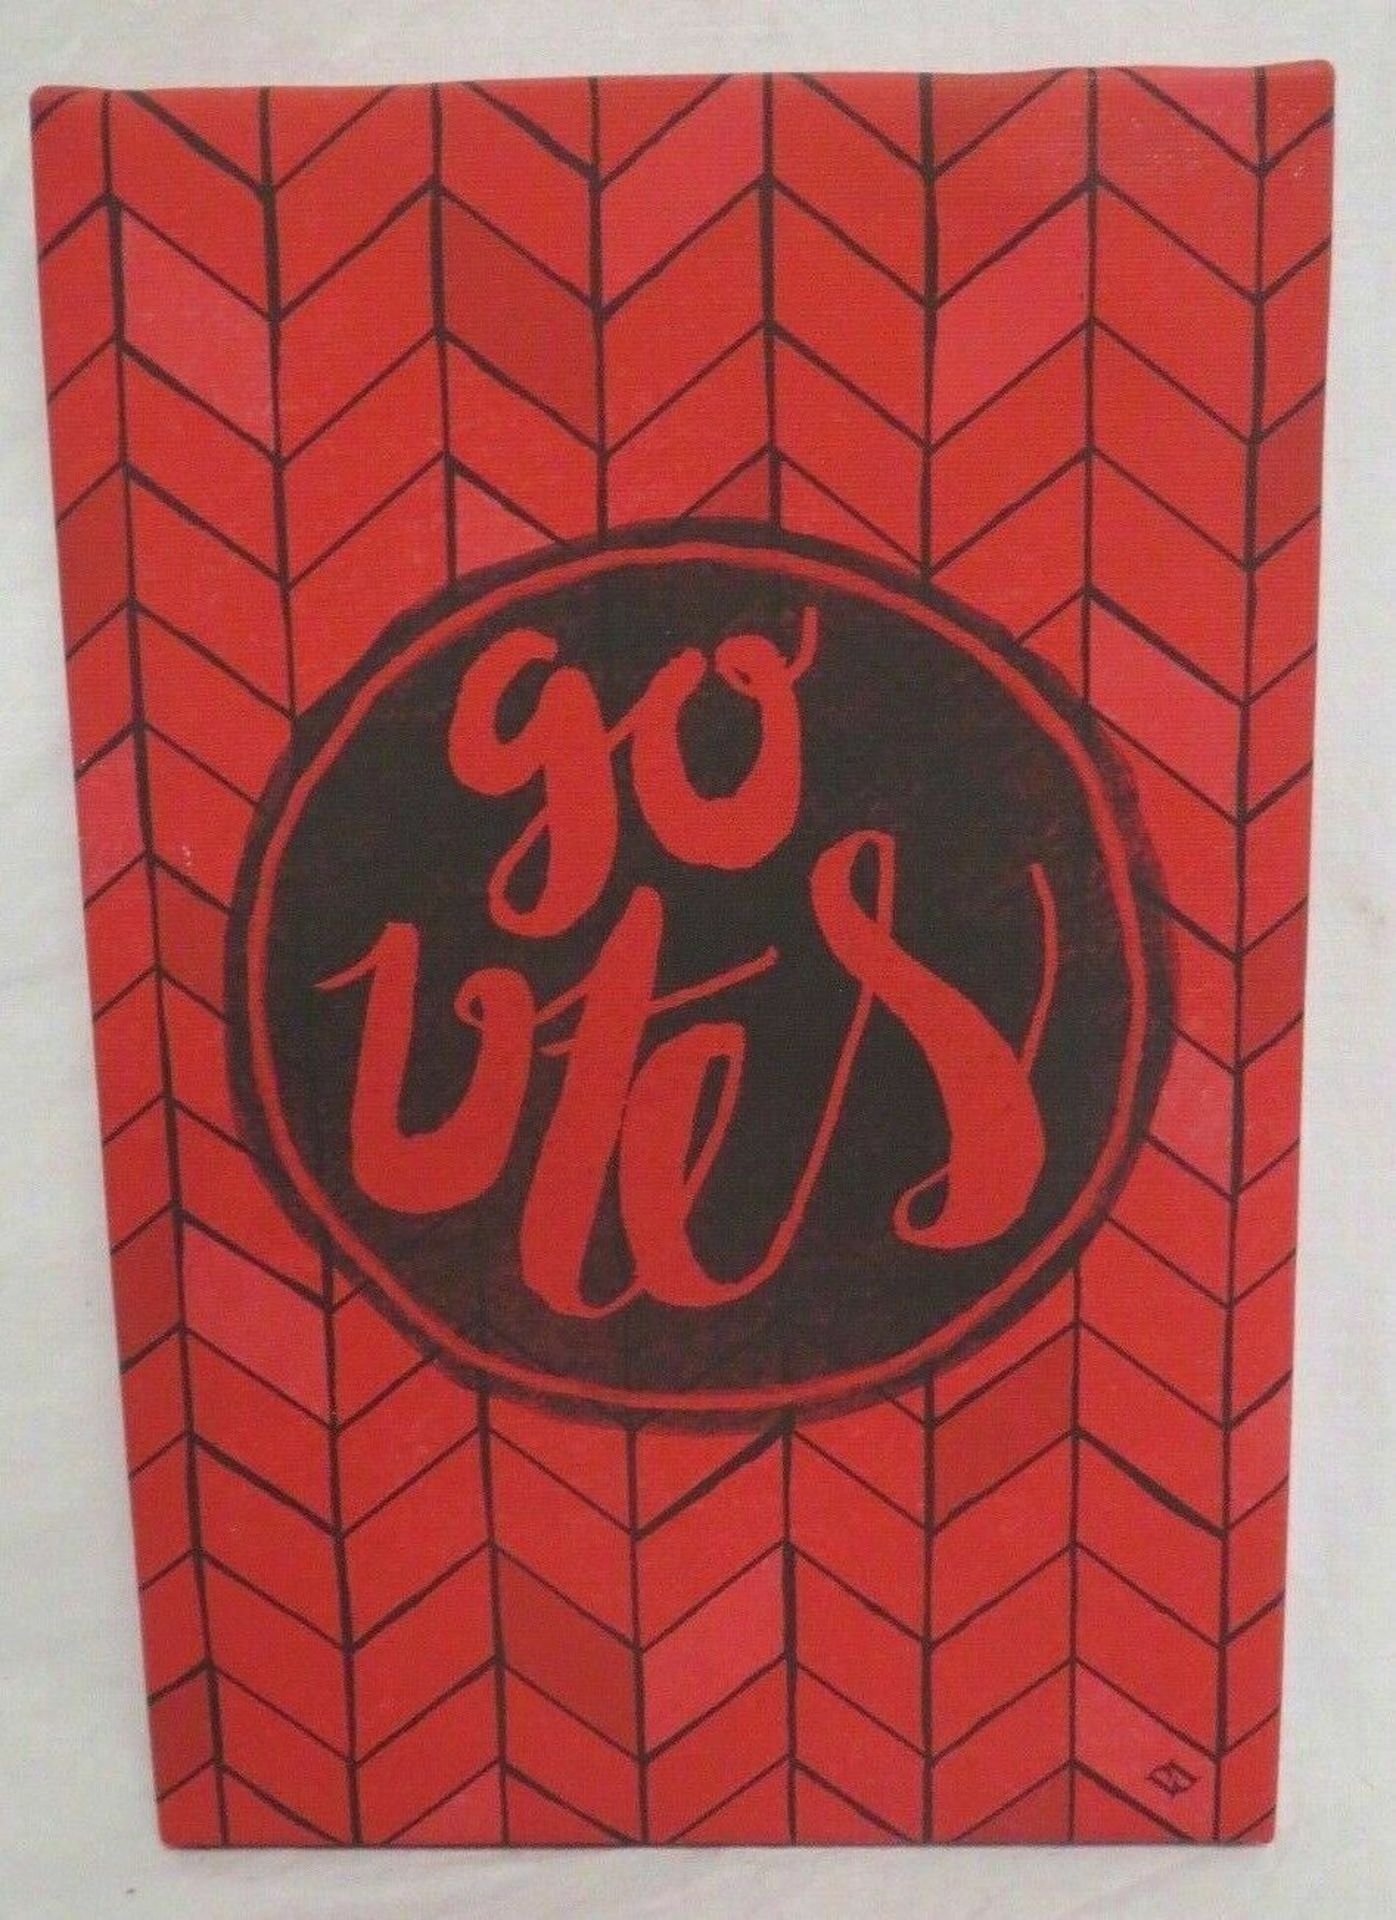 Utah Utes Lot Of 5 Canvas Painting Pictures Brand New - Image 7 of 9